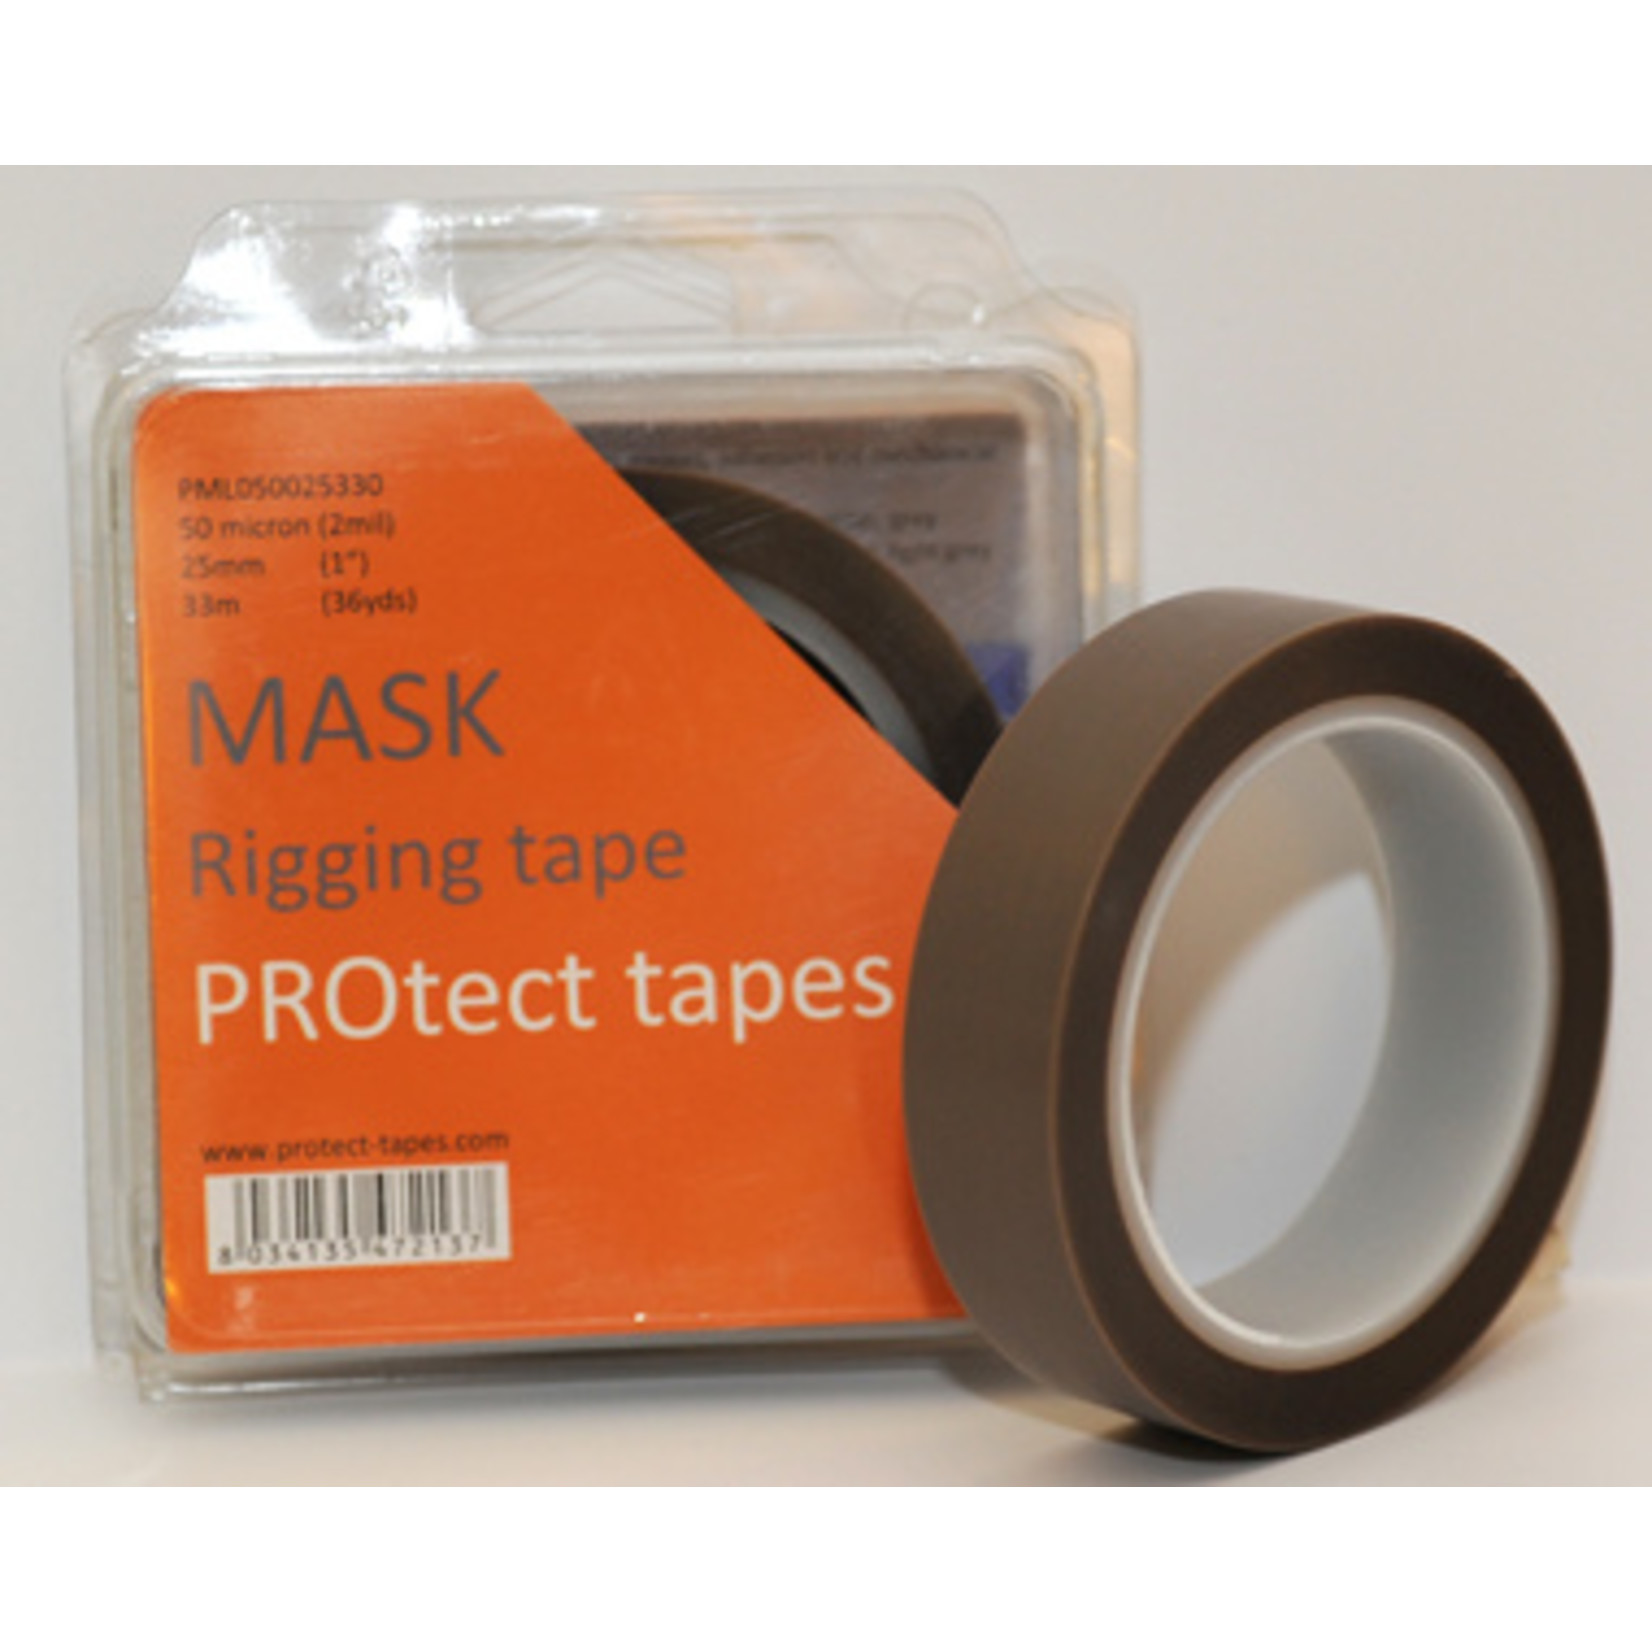 PROtect Tapes Mask 50mic. PTFE light grey 25mm x 33m